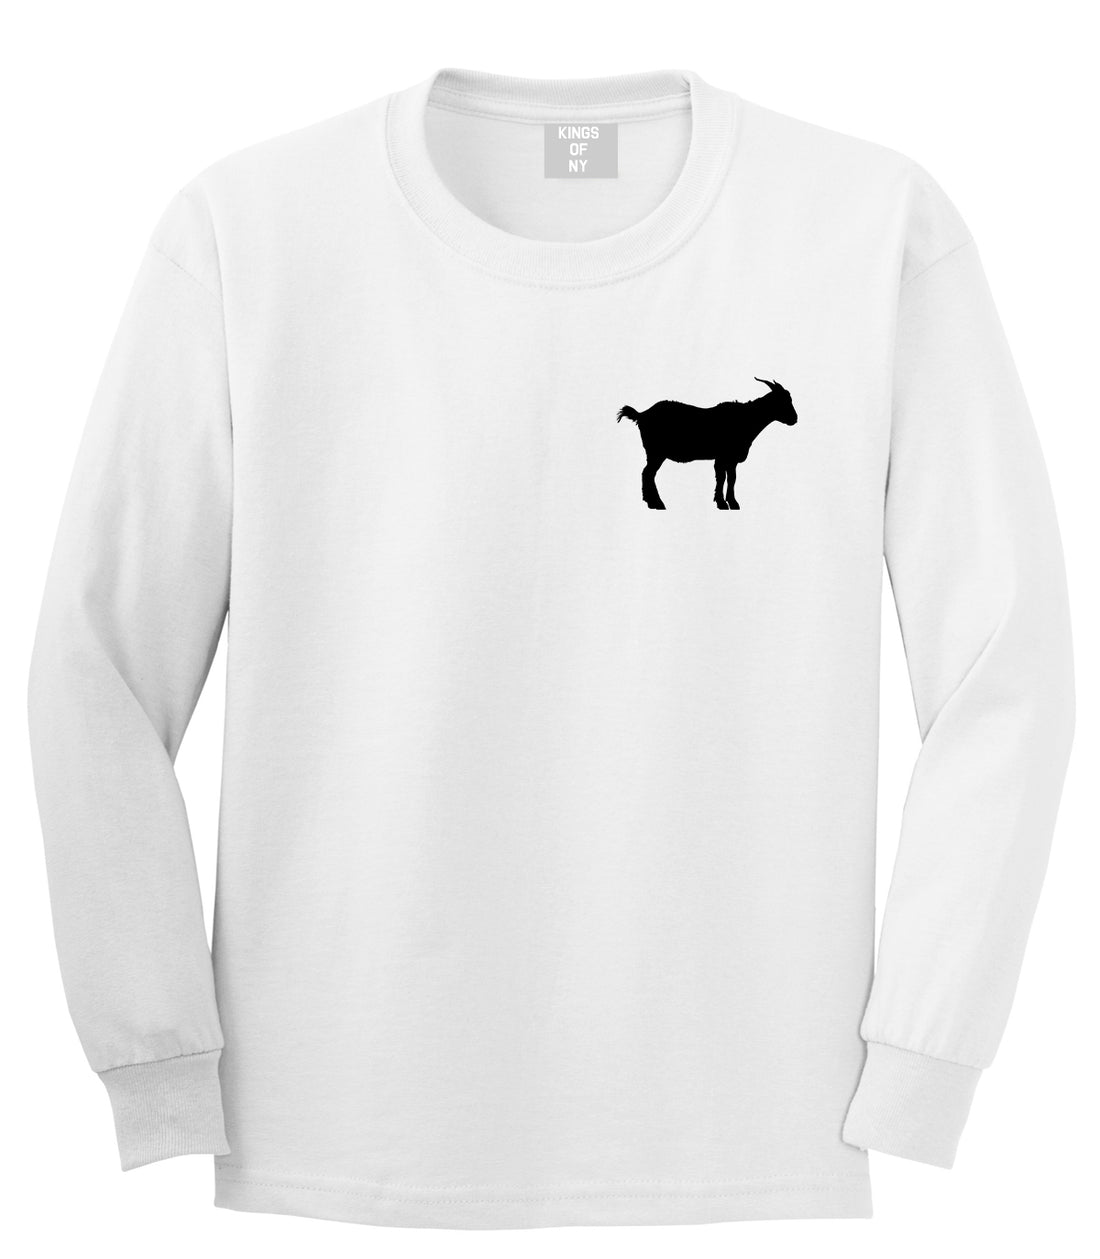 Goat Animal Chest Mens White Long Sleeve T-Shirt by KINGS OF NY